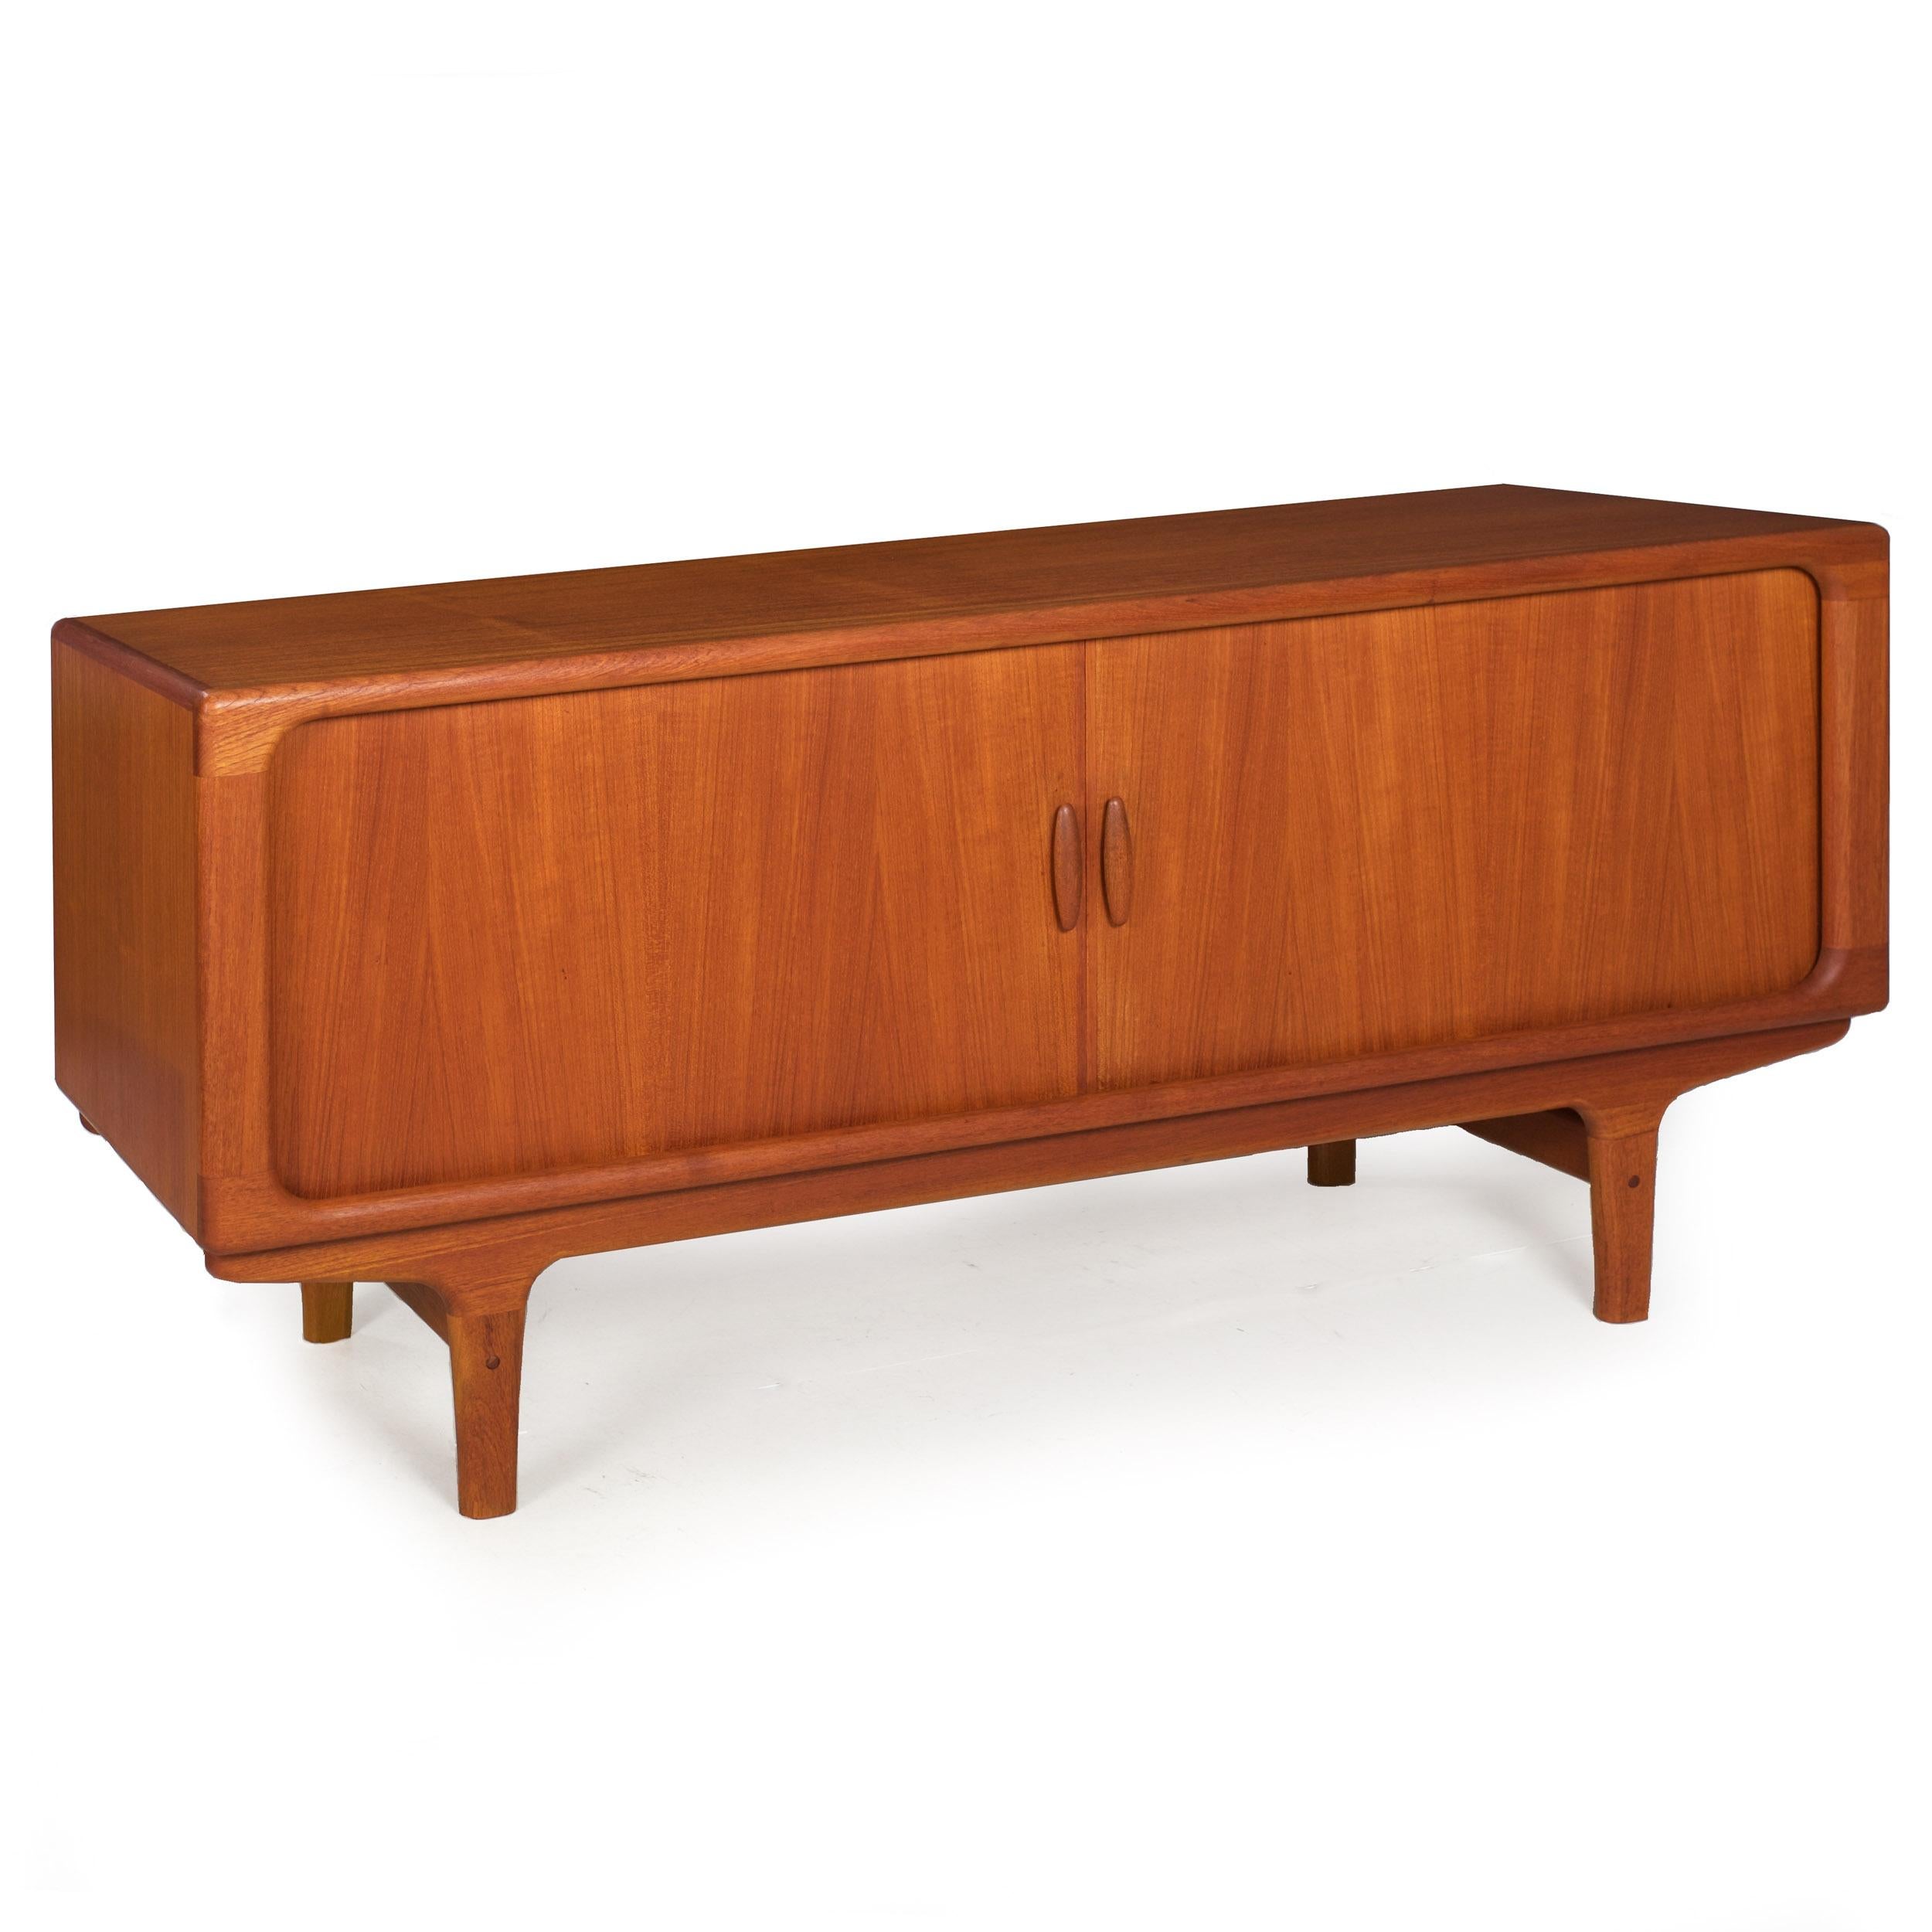 A very well-preserved low sideboard credenza designed and executed by Dryland of Denmark in the 1960s, it features an all-over teak surface with disappearing tambour doors that operate using sculpted solid teak handles to reveal a shelved interior